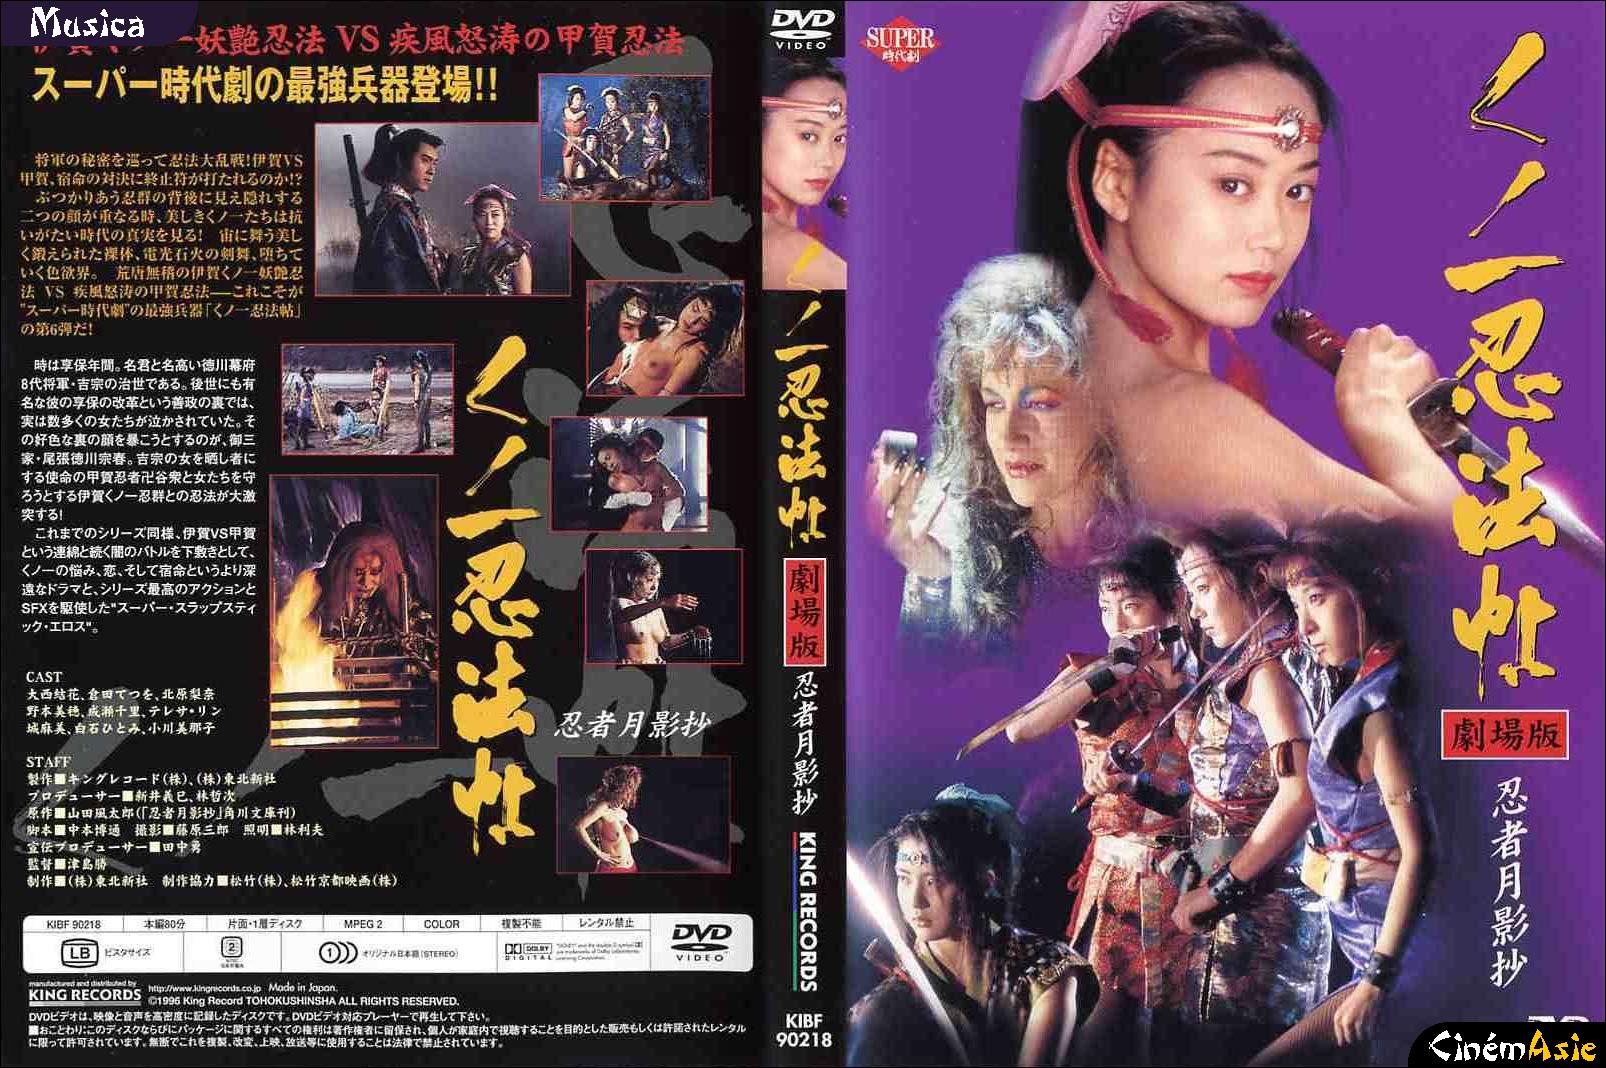 Lady Ninja: Reflections of Darkness (2011): Where to Watch and